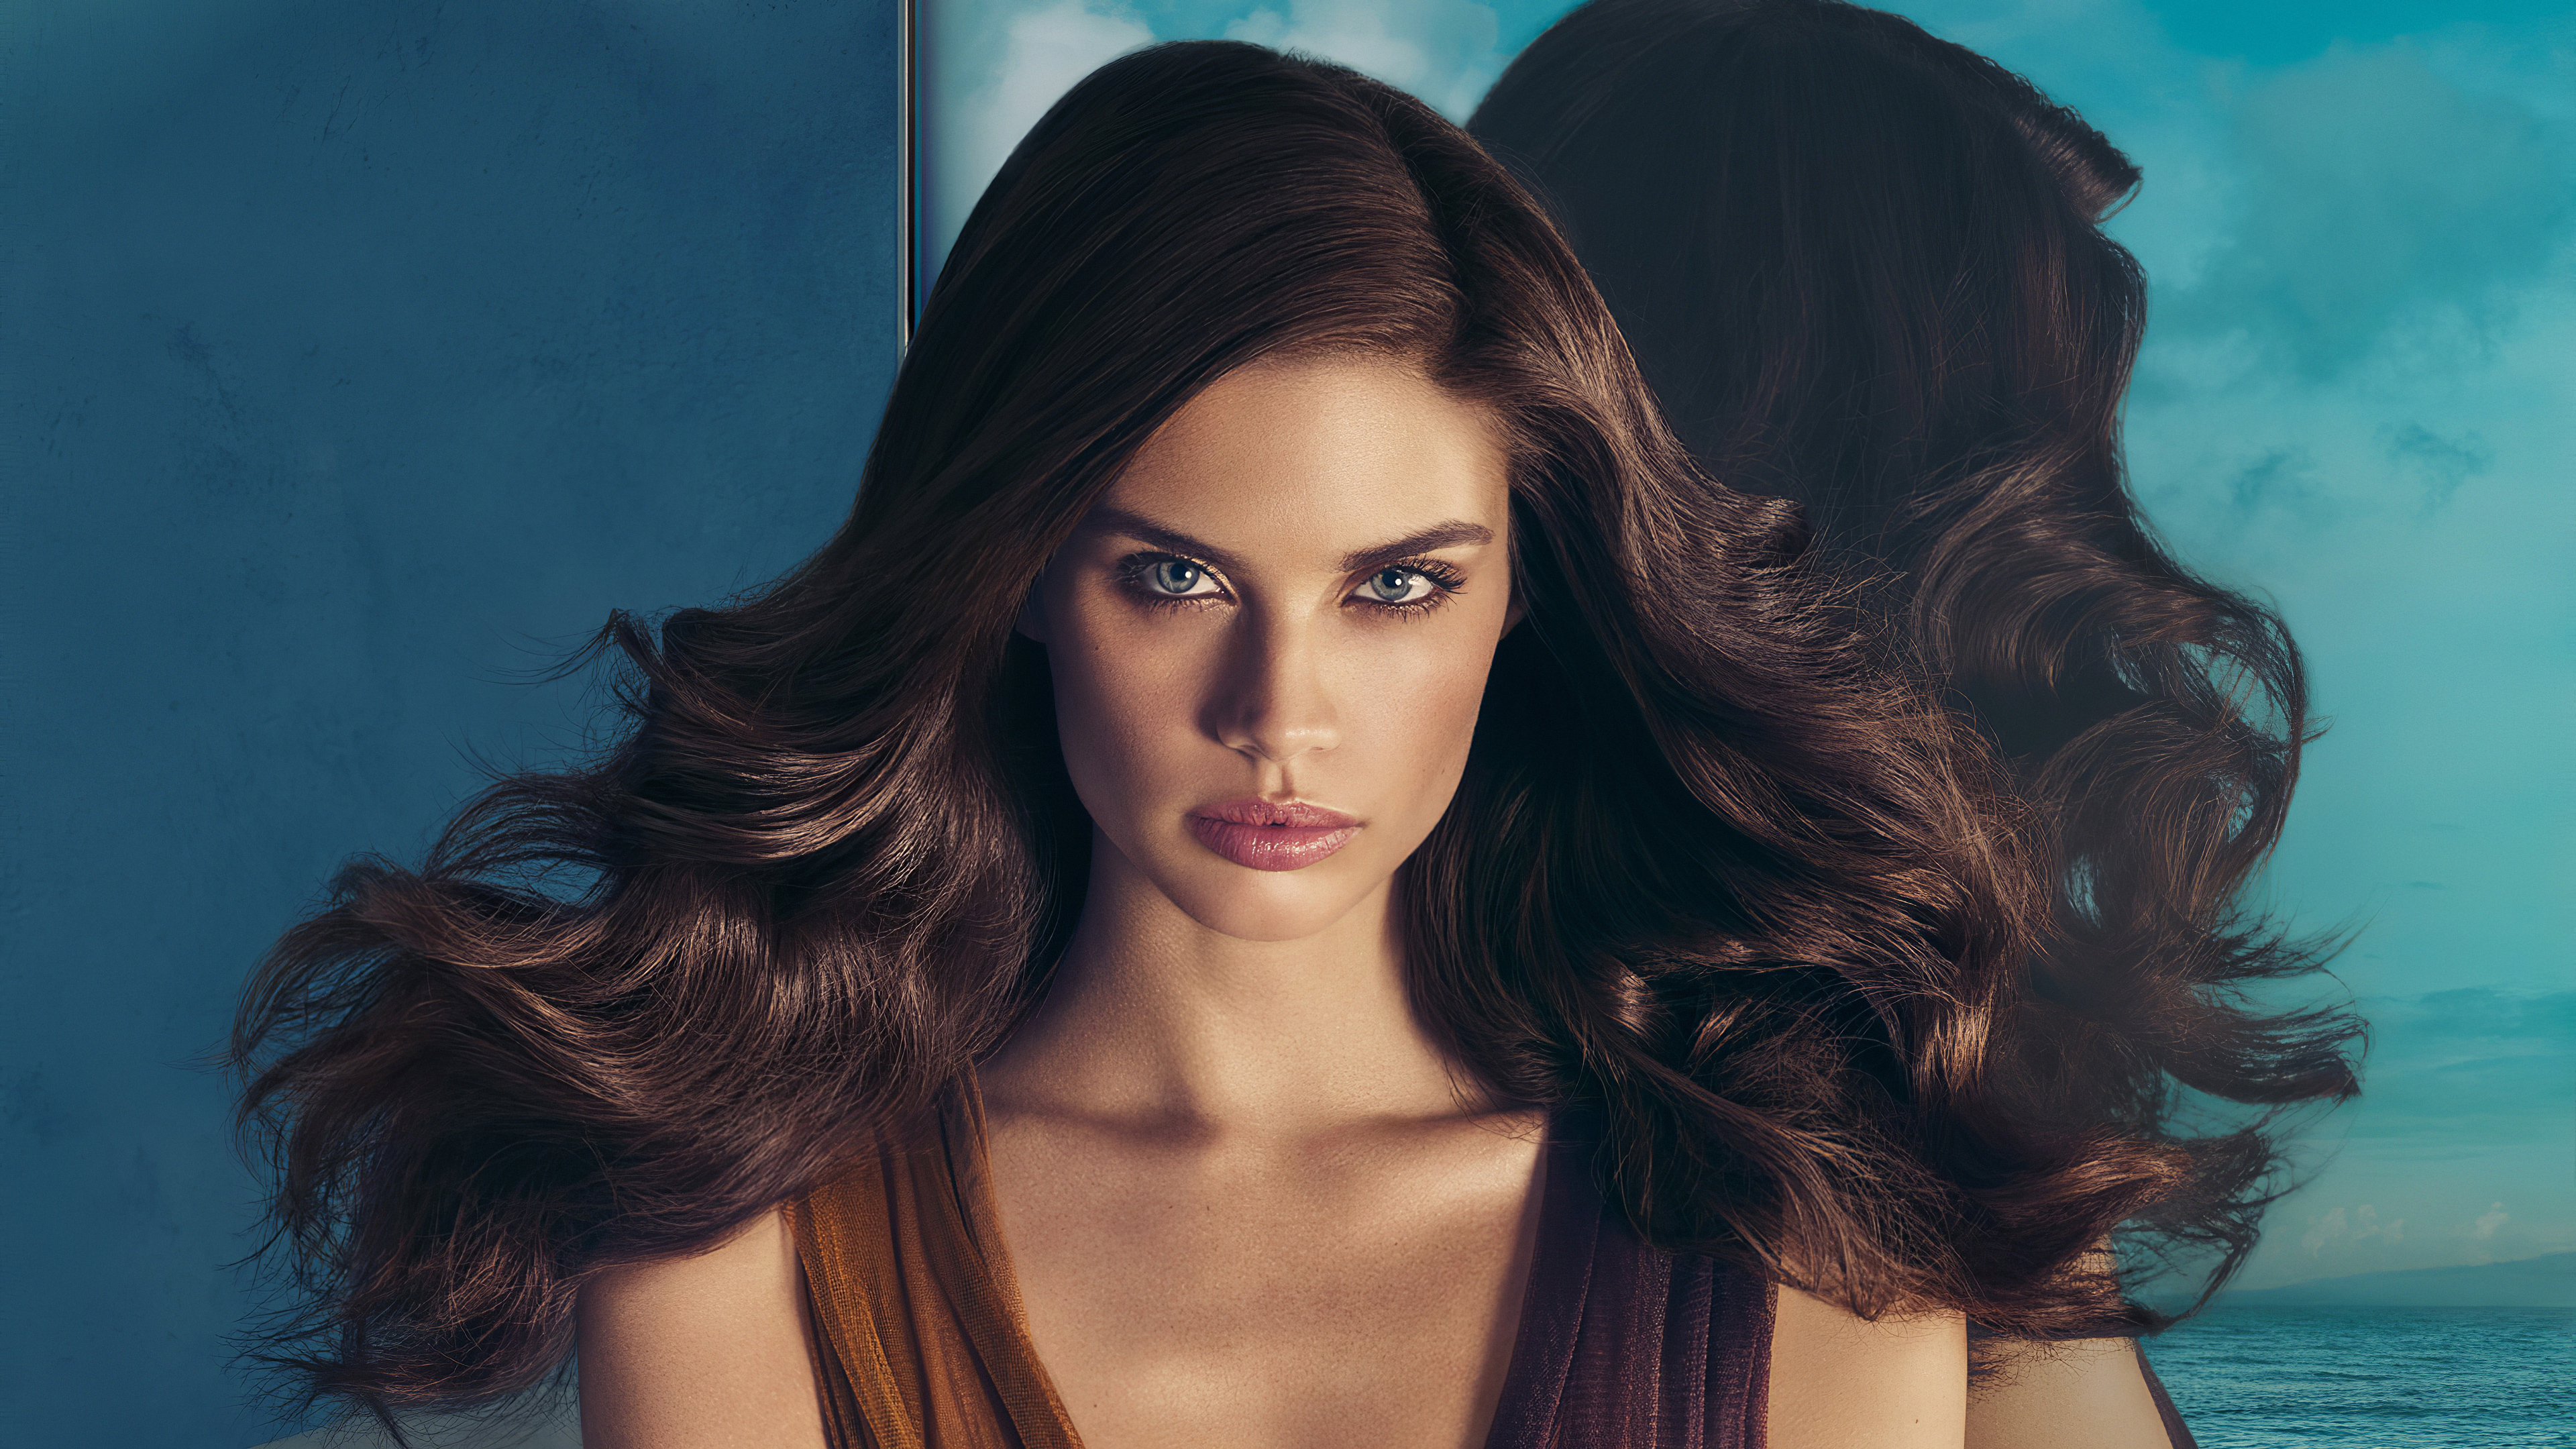 Sara Sampaio 4k 2019, HD Celebrities, 4k Wallpapers, Images, Backgrounds,  Photos and Pictures